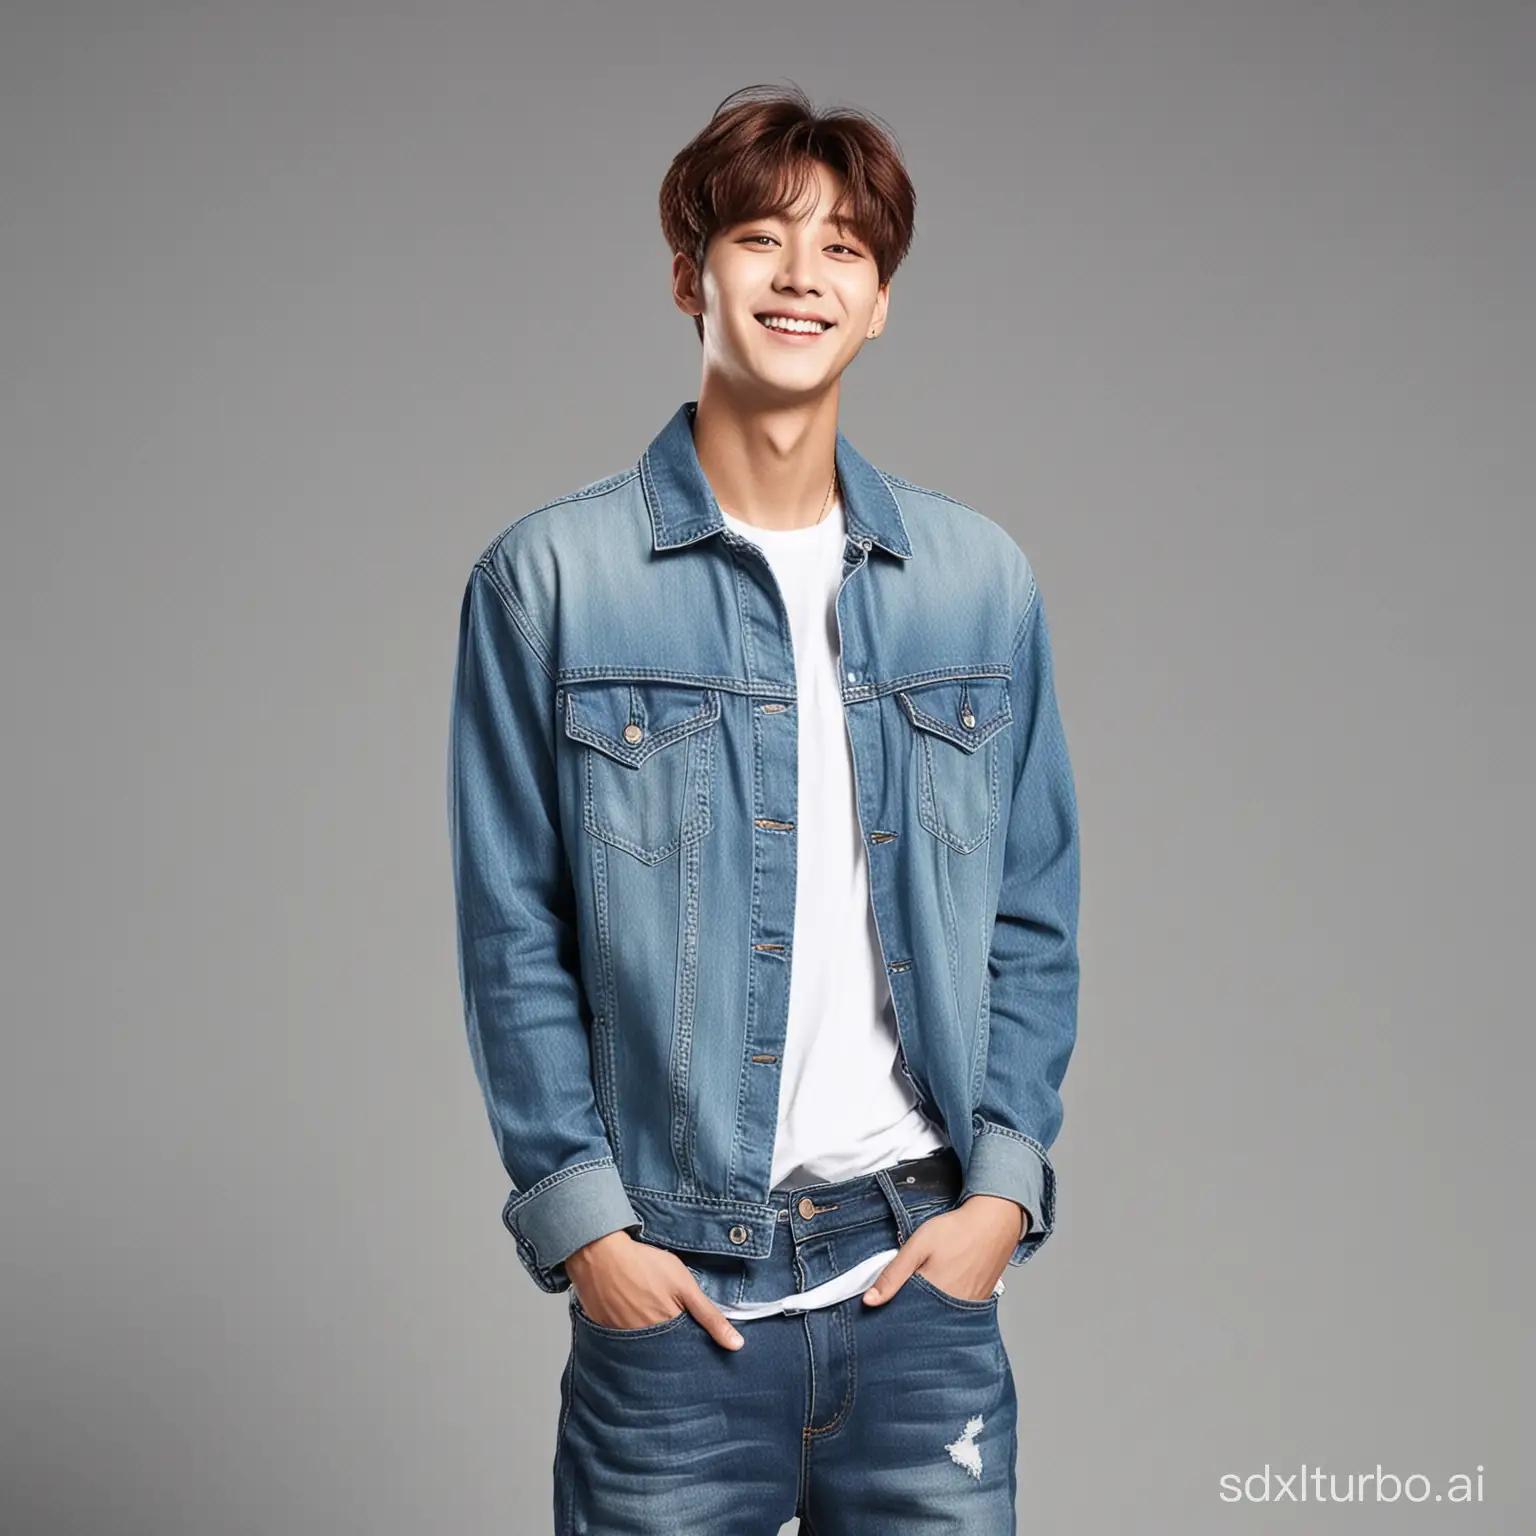 A handsome boy tall cute strong smile beautiful face like Jung Kook in jeans